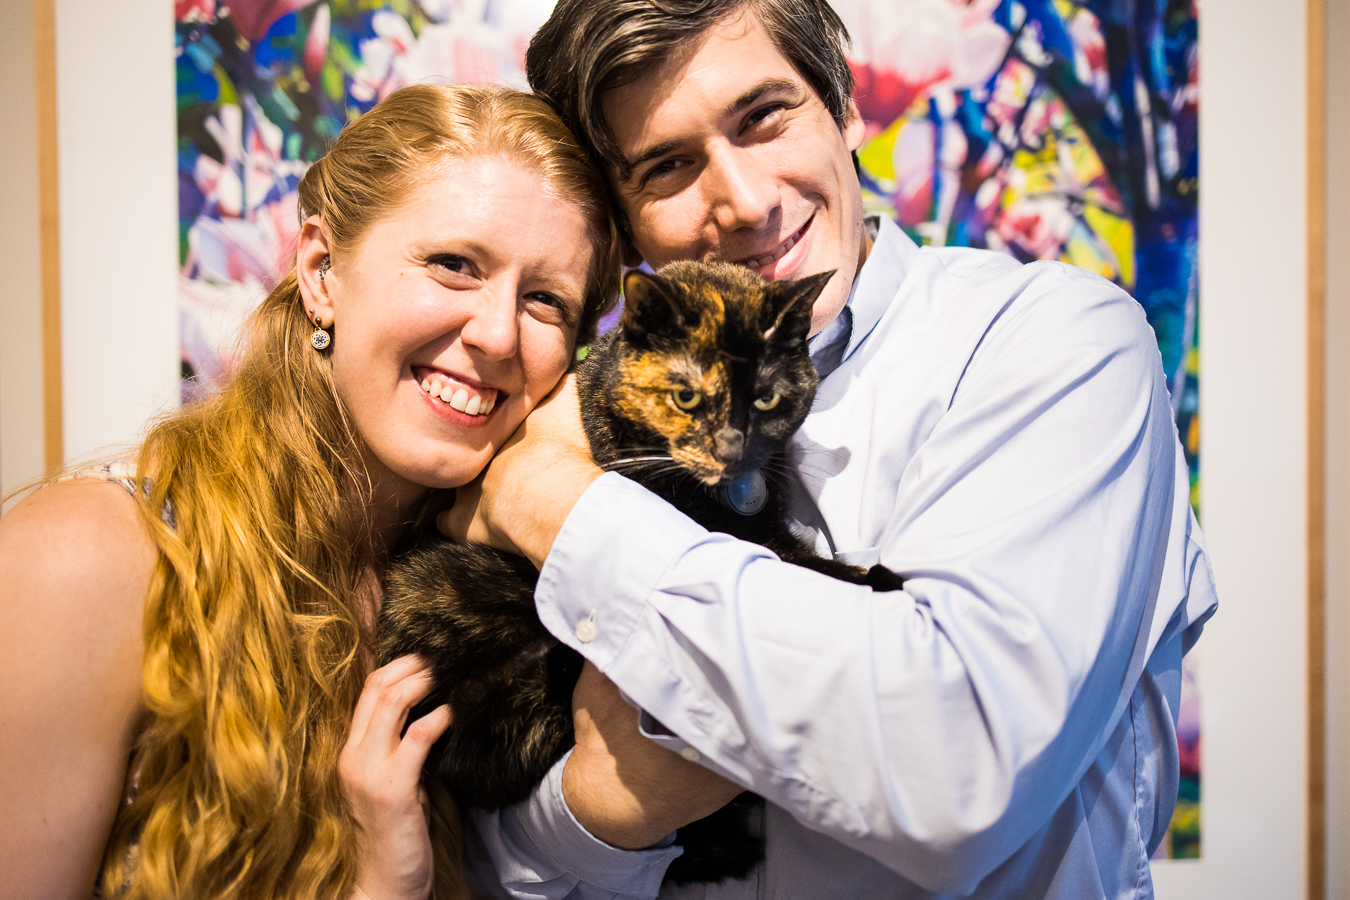 family portrait of the couple with their cat as the cat tries to jump out of their arms during the photo